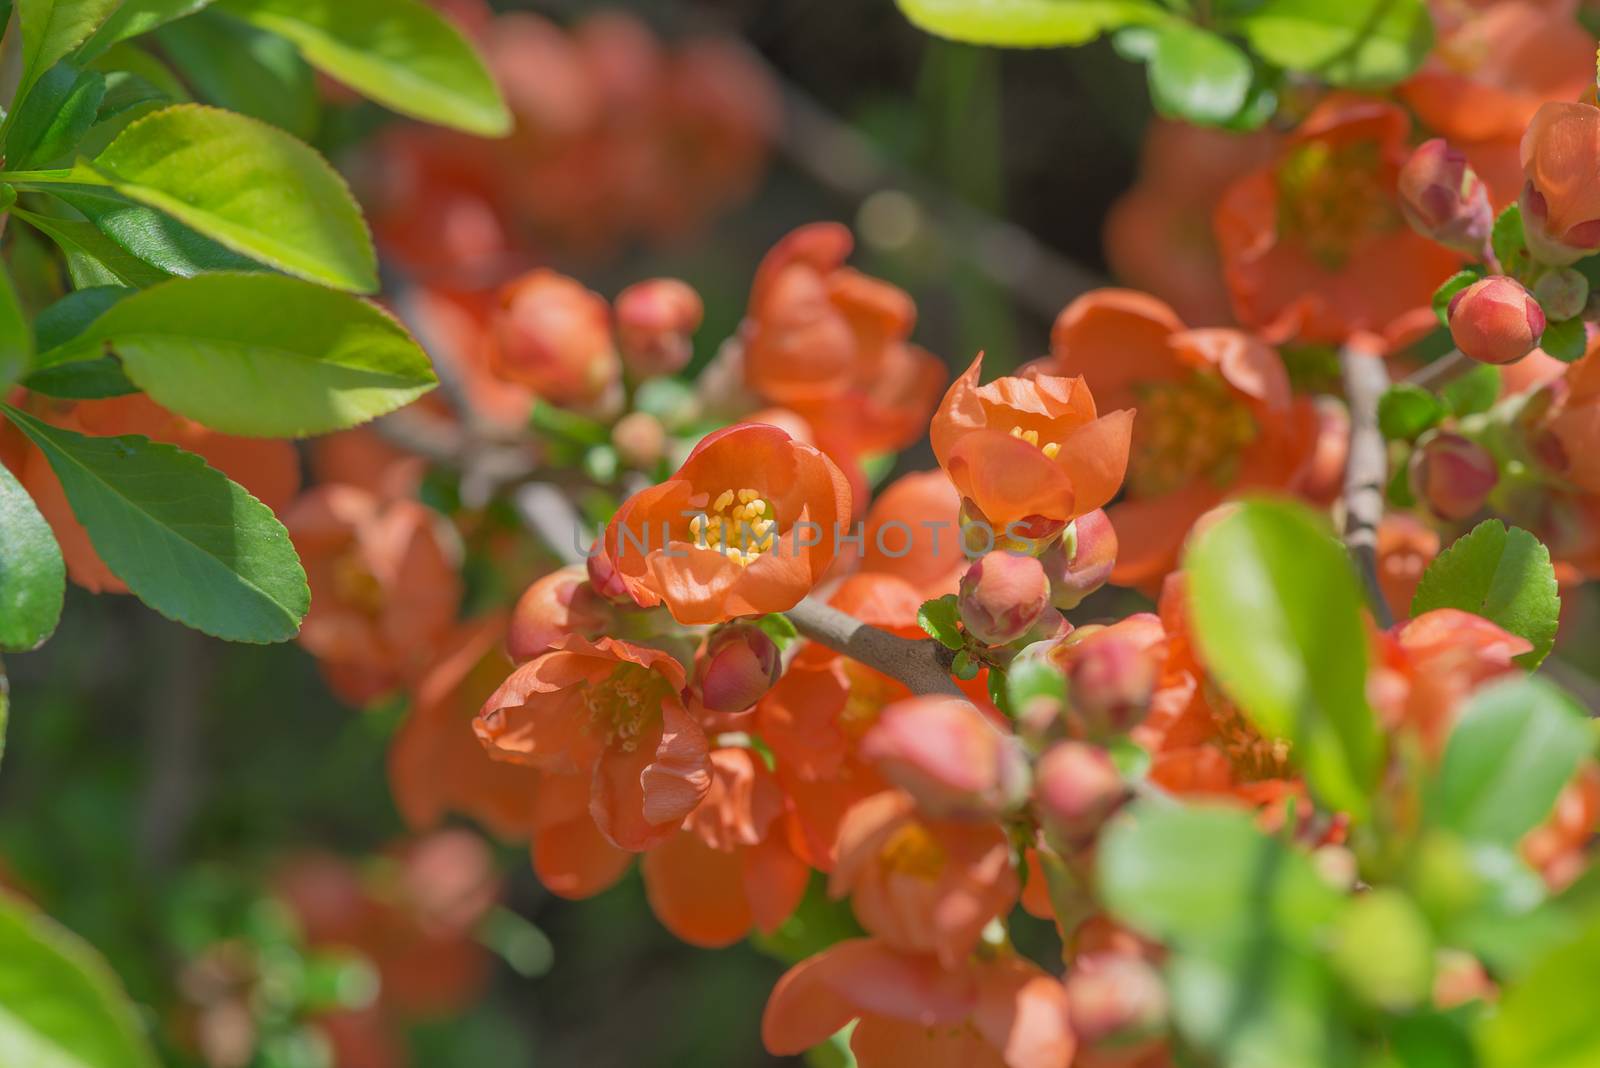 Blooming Chaenomeles japonica by Epitavi